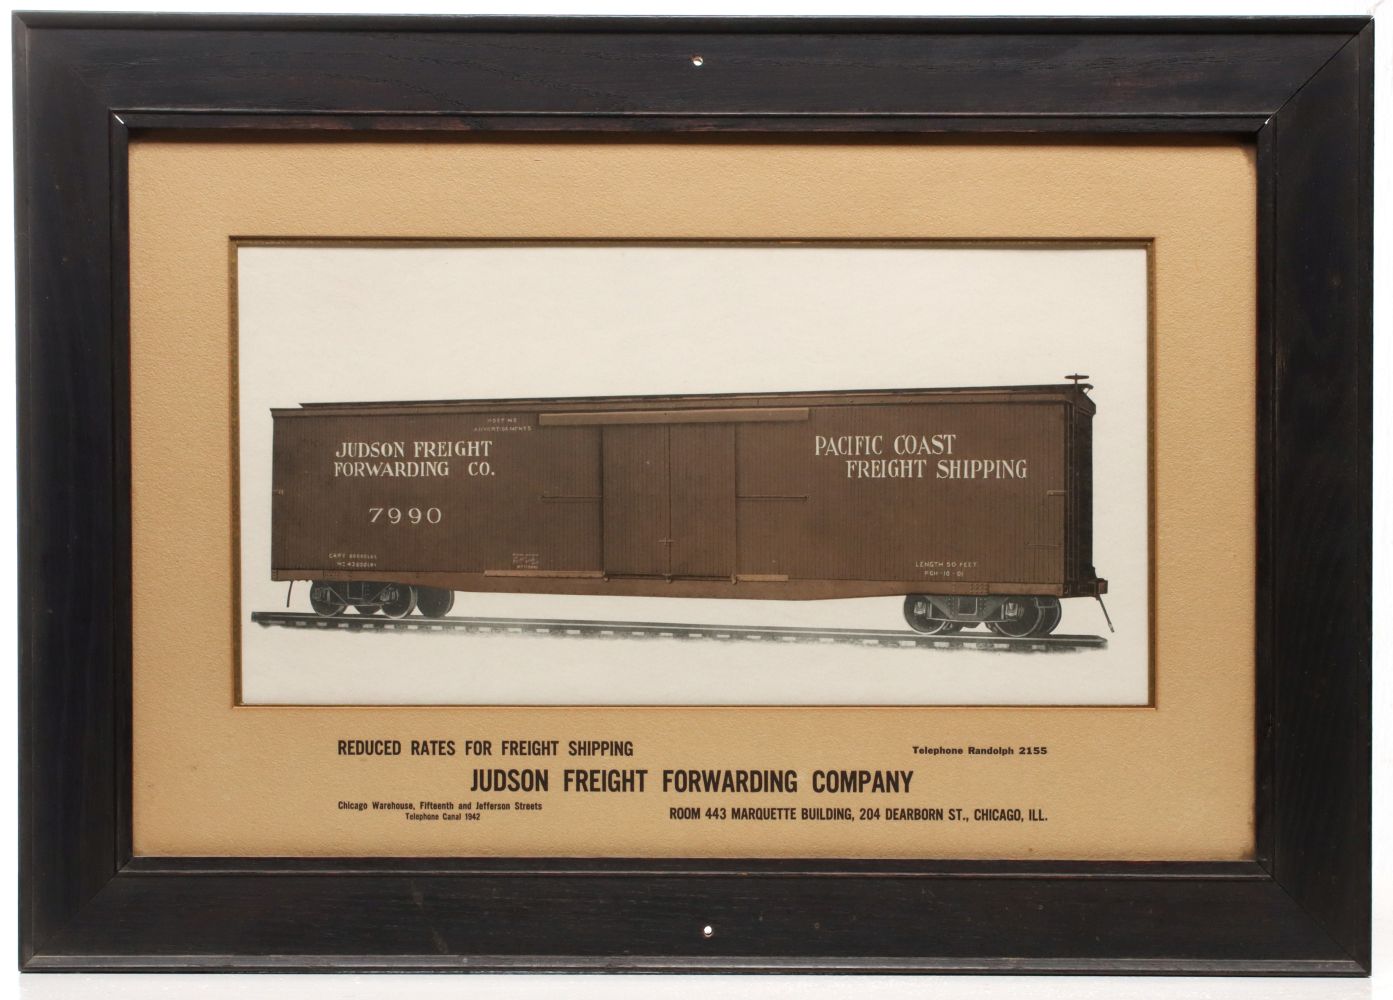 A RAILROAD BOXCAR ADVERTISING PRINT FOR JUDSON FREIGHT